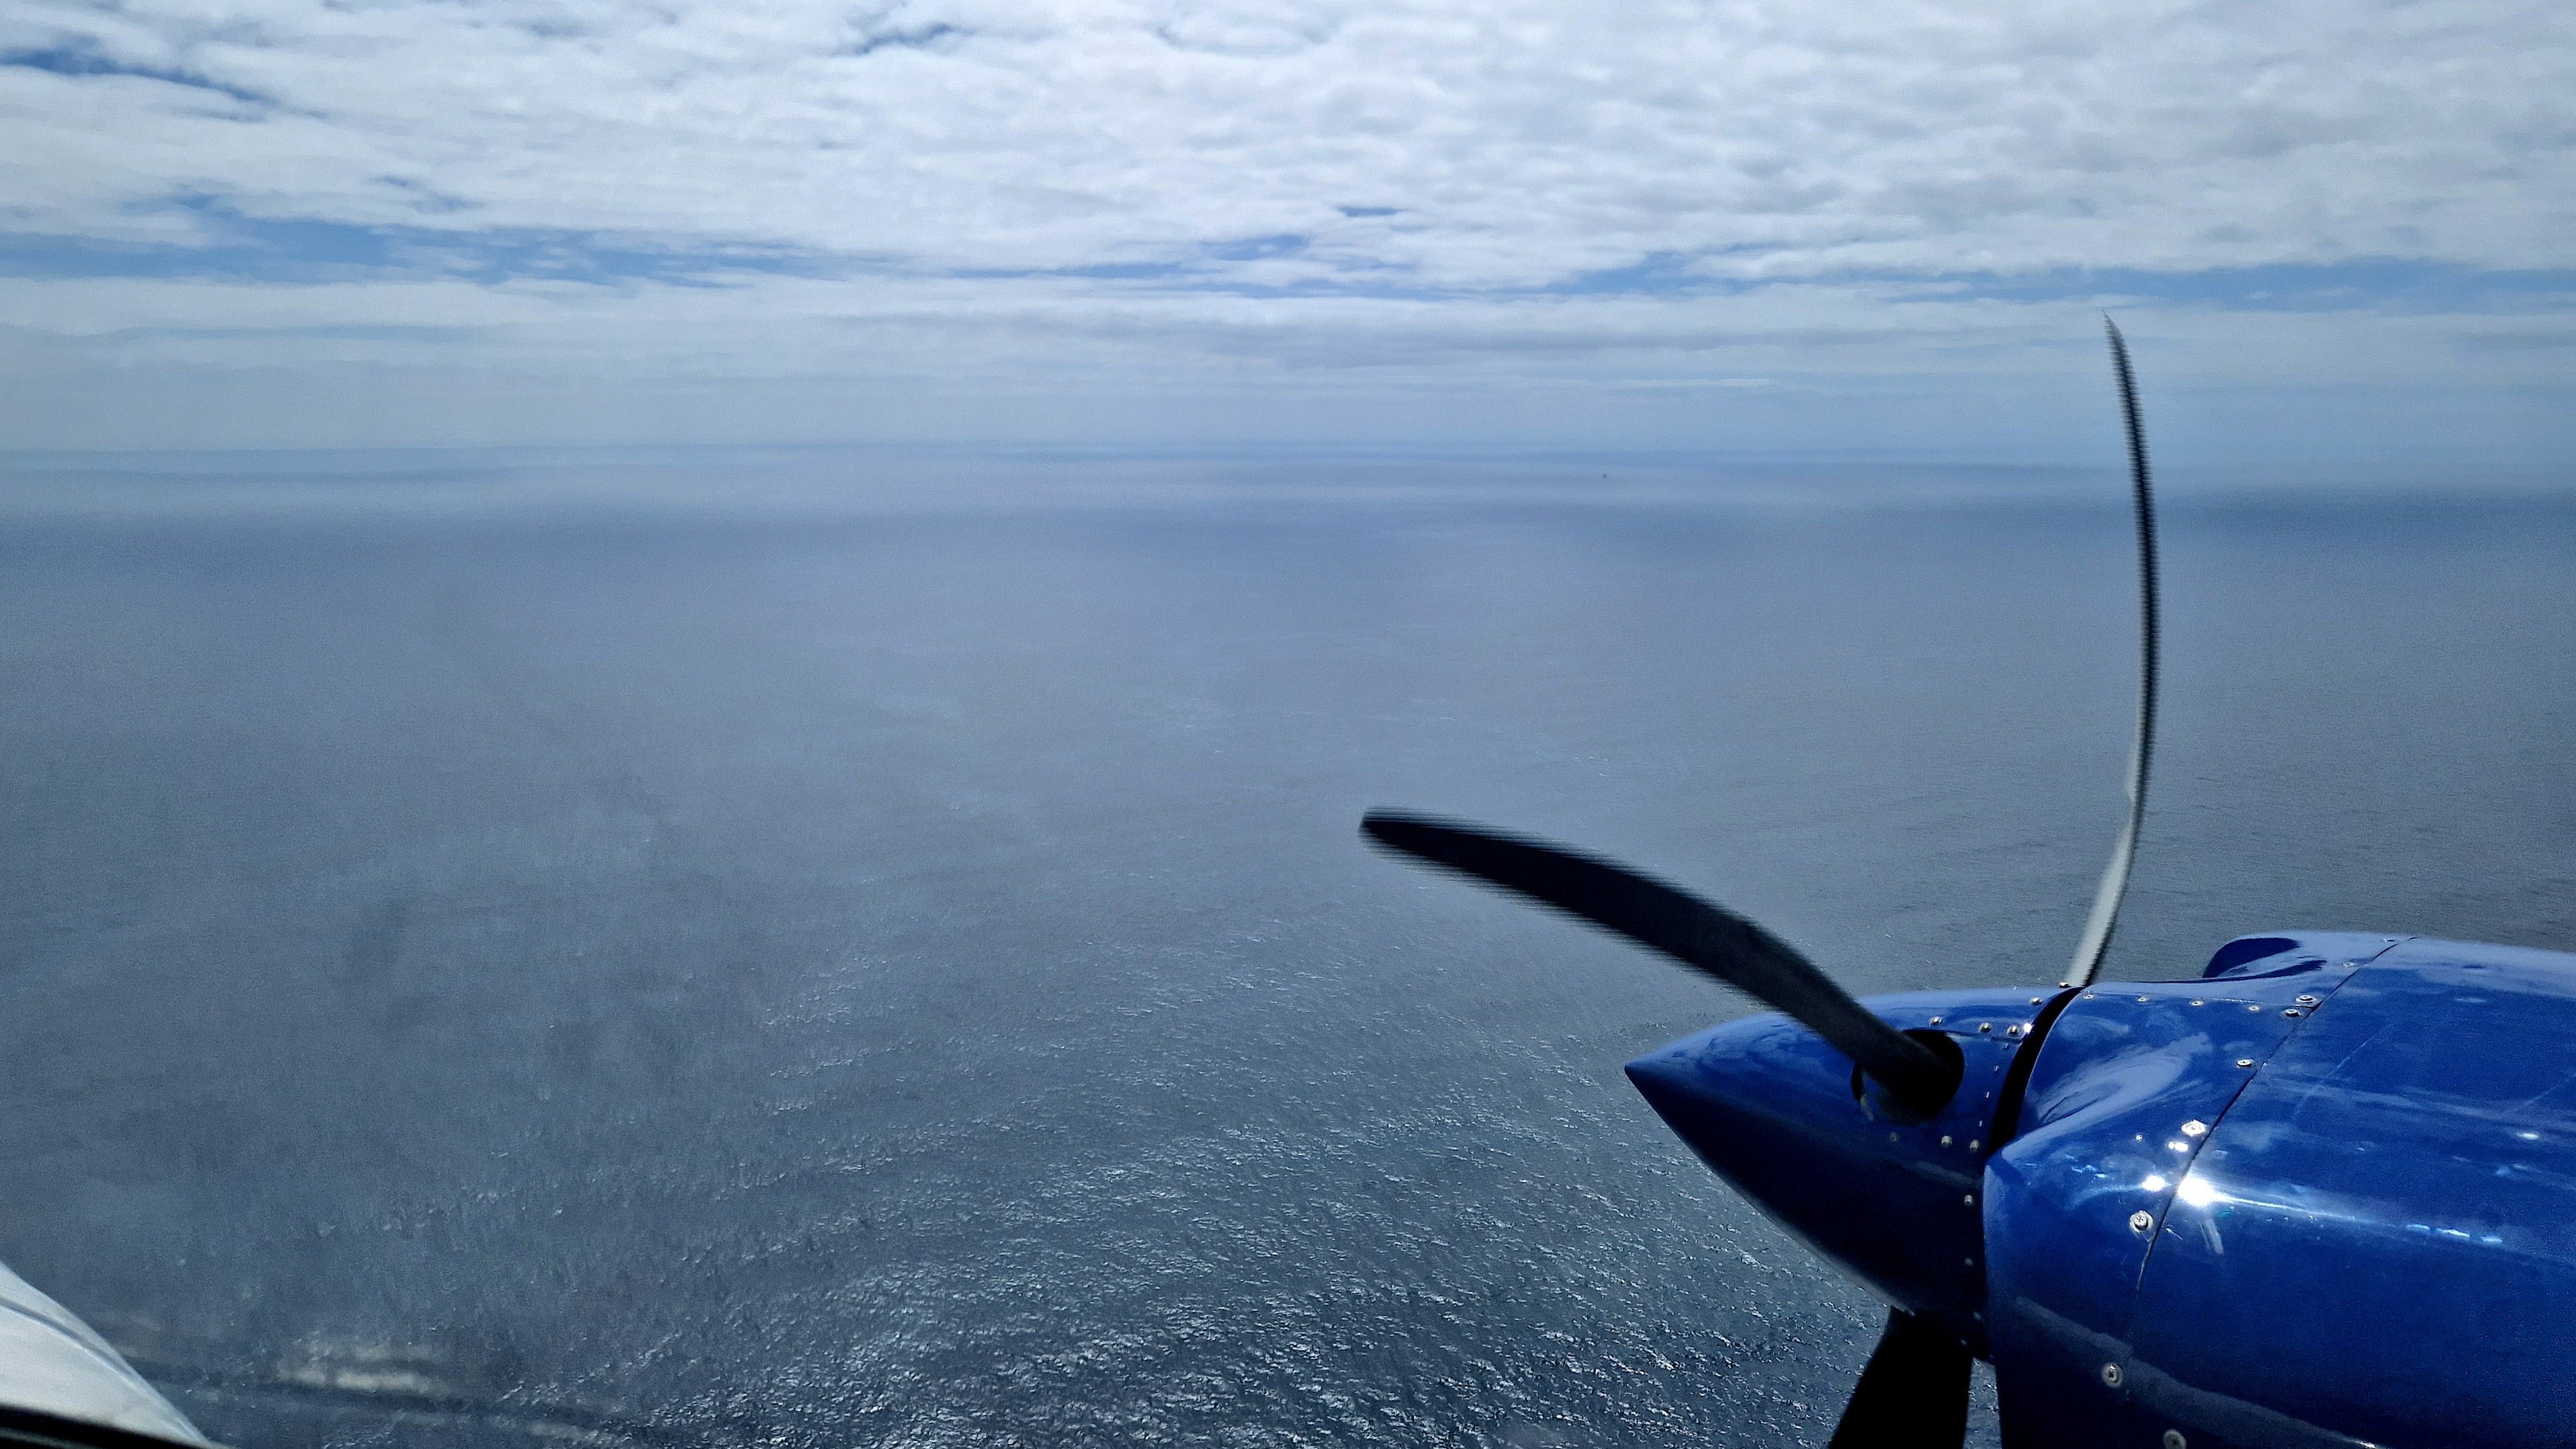 View of the sea from an aeroplane window, with the propeller of the aircraft in the front right of the image.